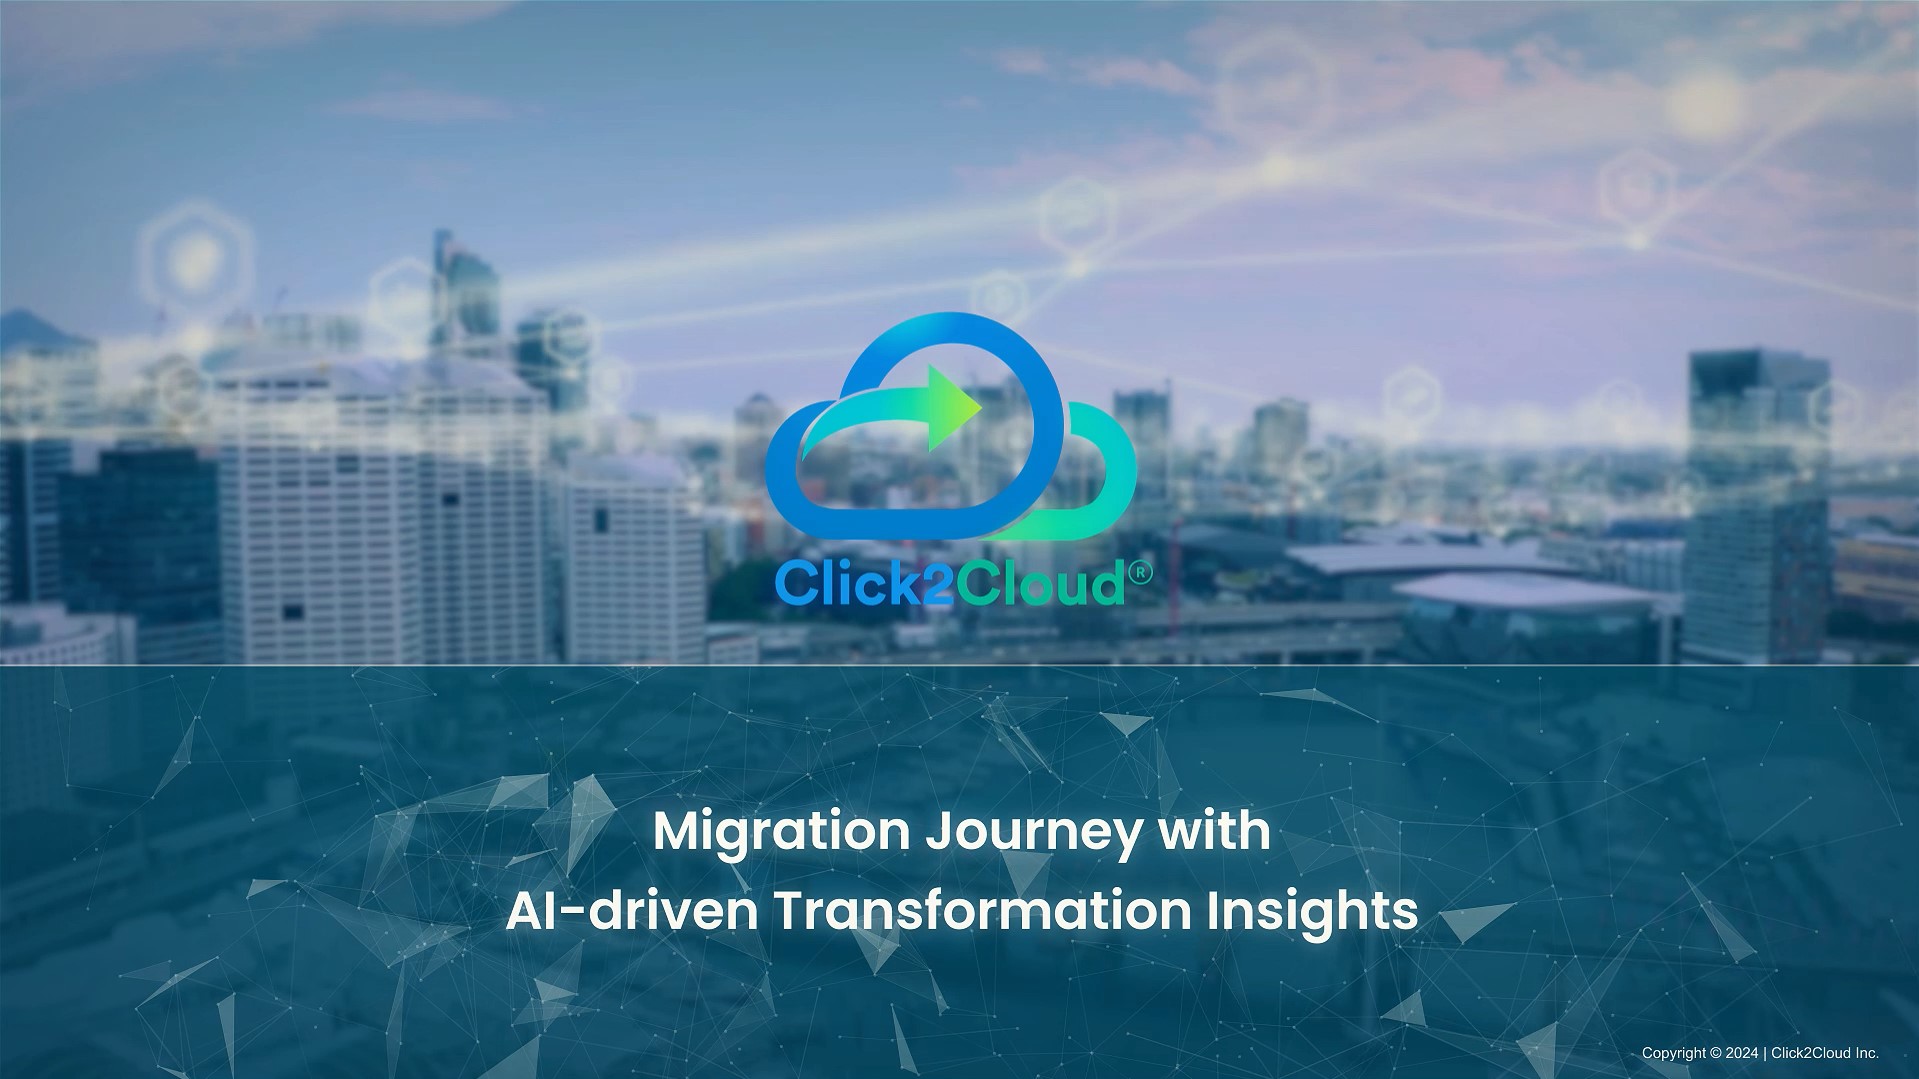 Empowering Digital Leaders Through AI-Driven Transformation Insights-Click2Cloud